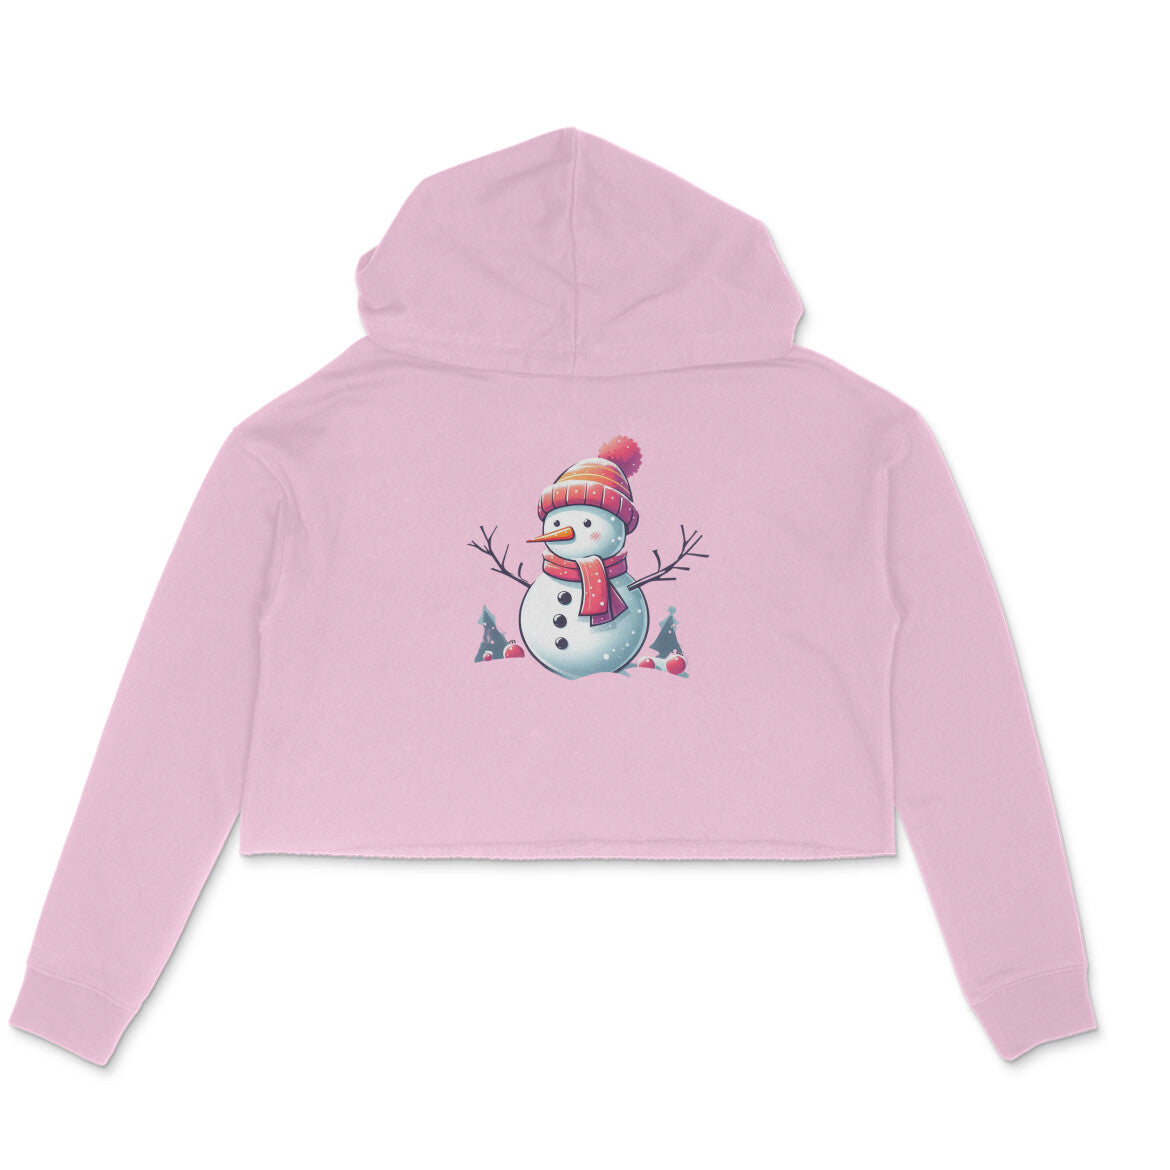 Winter Whimsy: Women's Printed Crop Hoody with Adorable Snowman